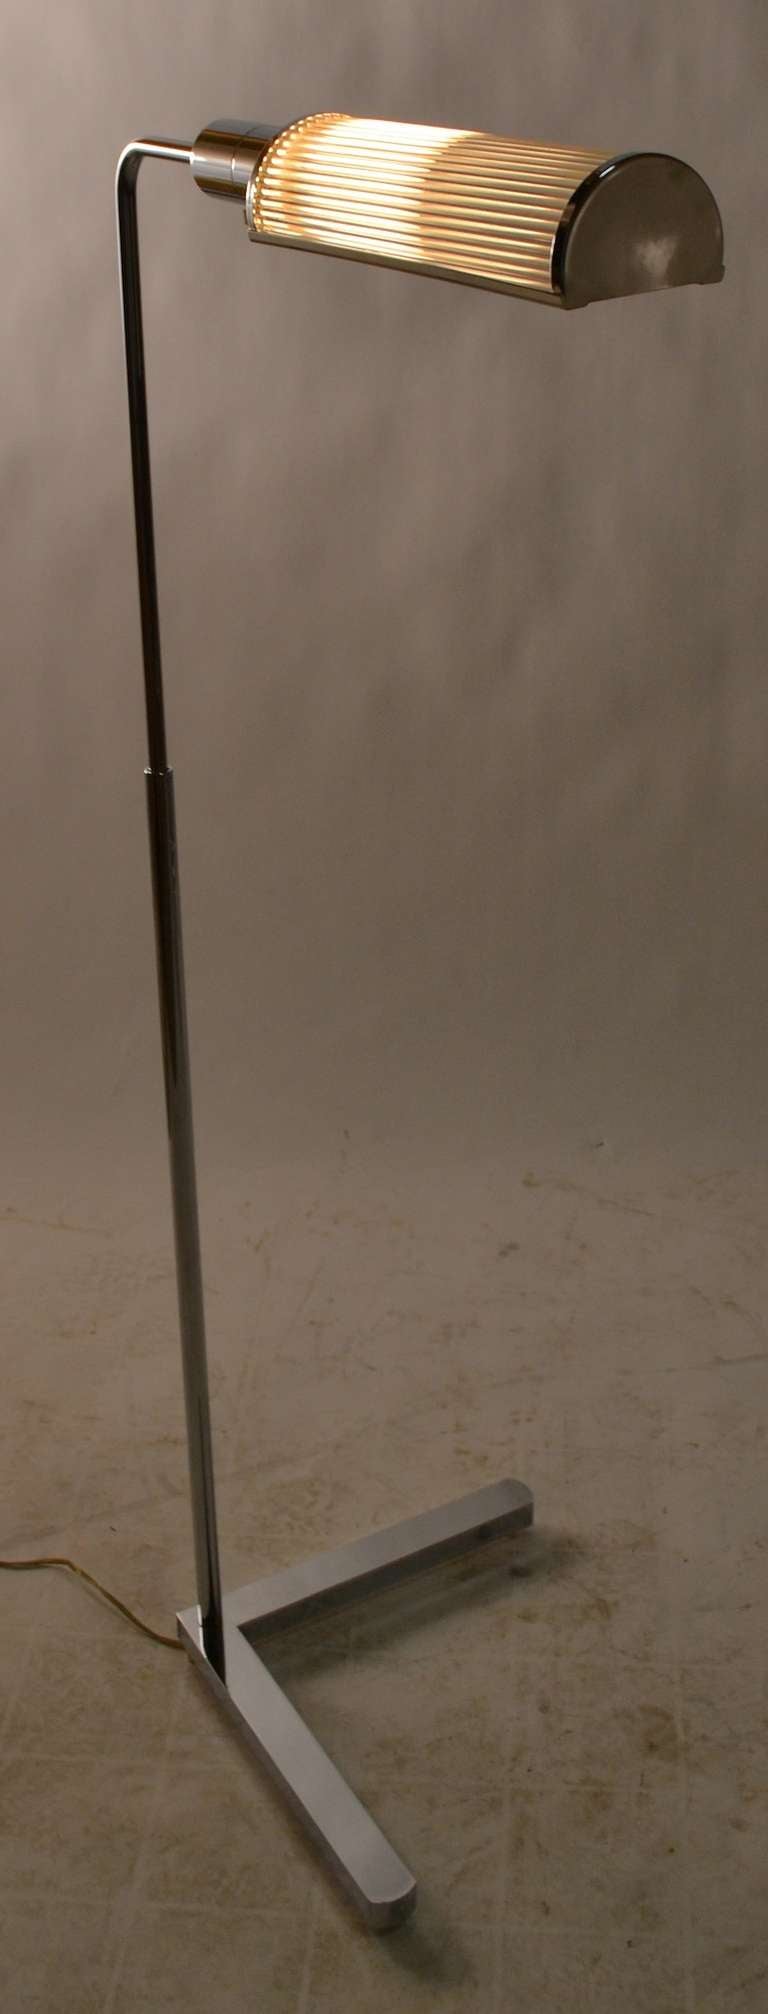 Adjustable Casella floor lamp, with glass rod shade. The hood shade swivels, and the vertical shaft extends ( 38